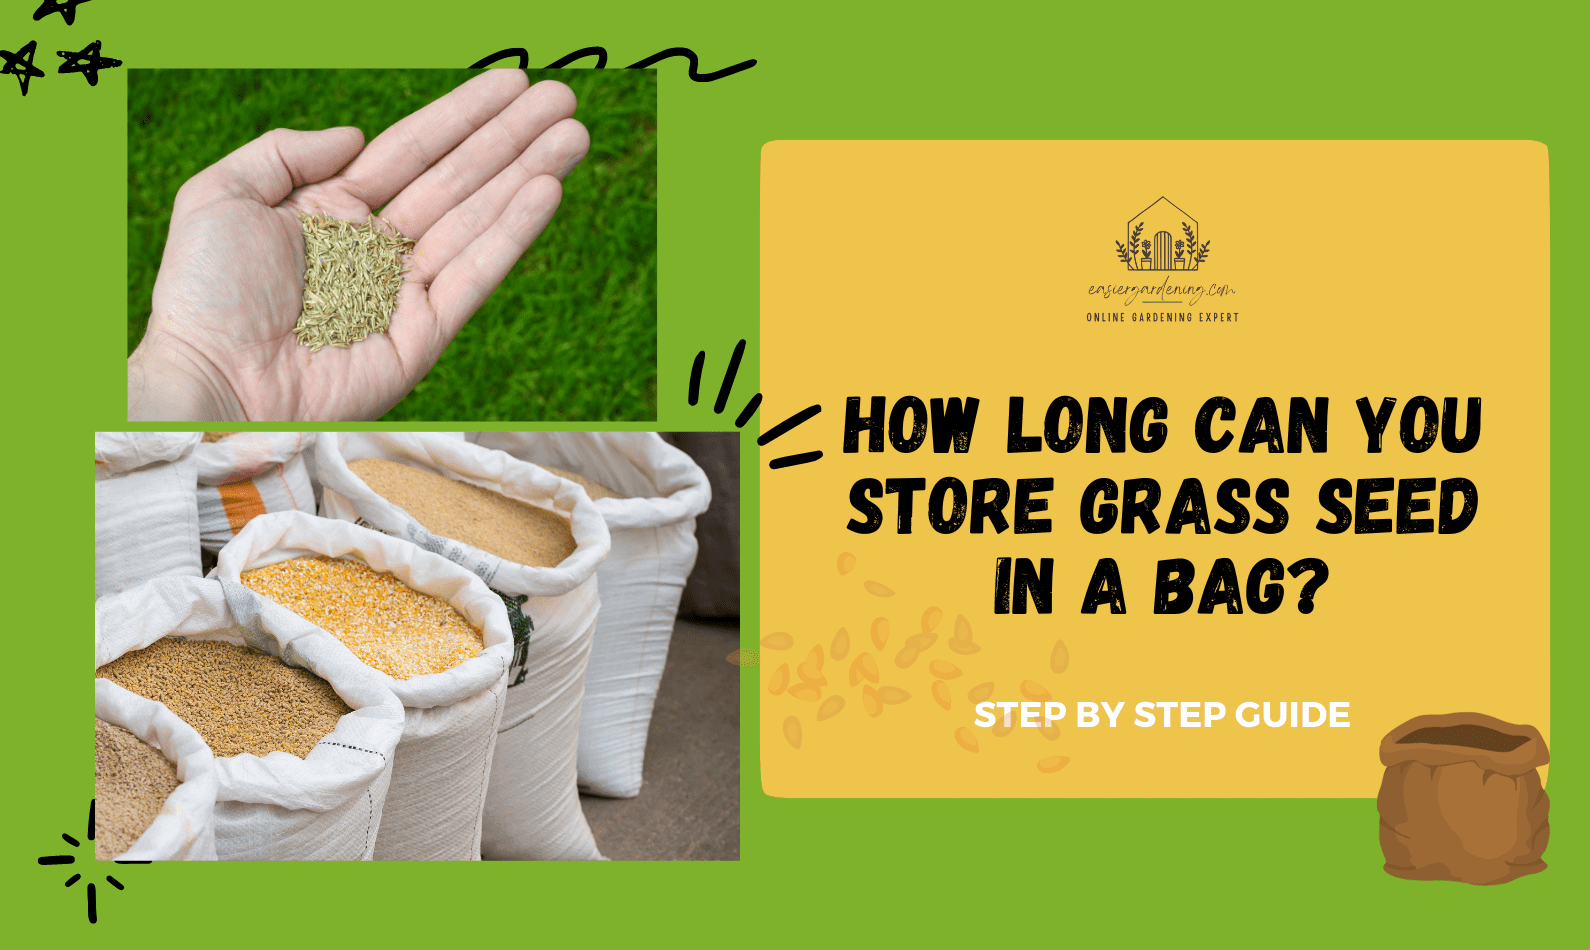 How Long can you Store Grass Seed in a Bag?